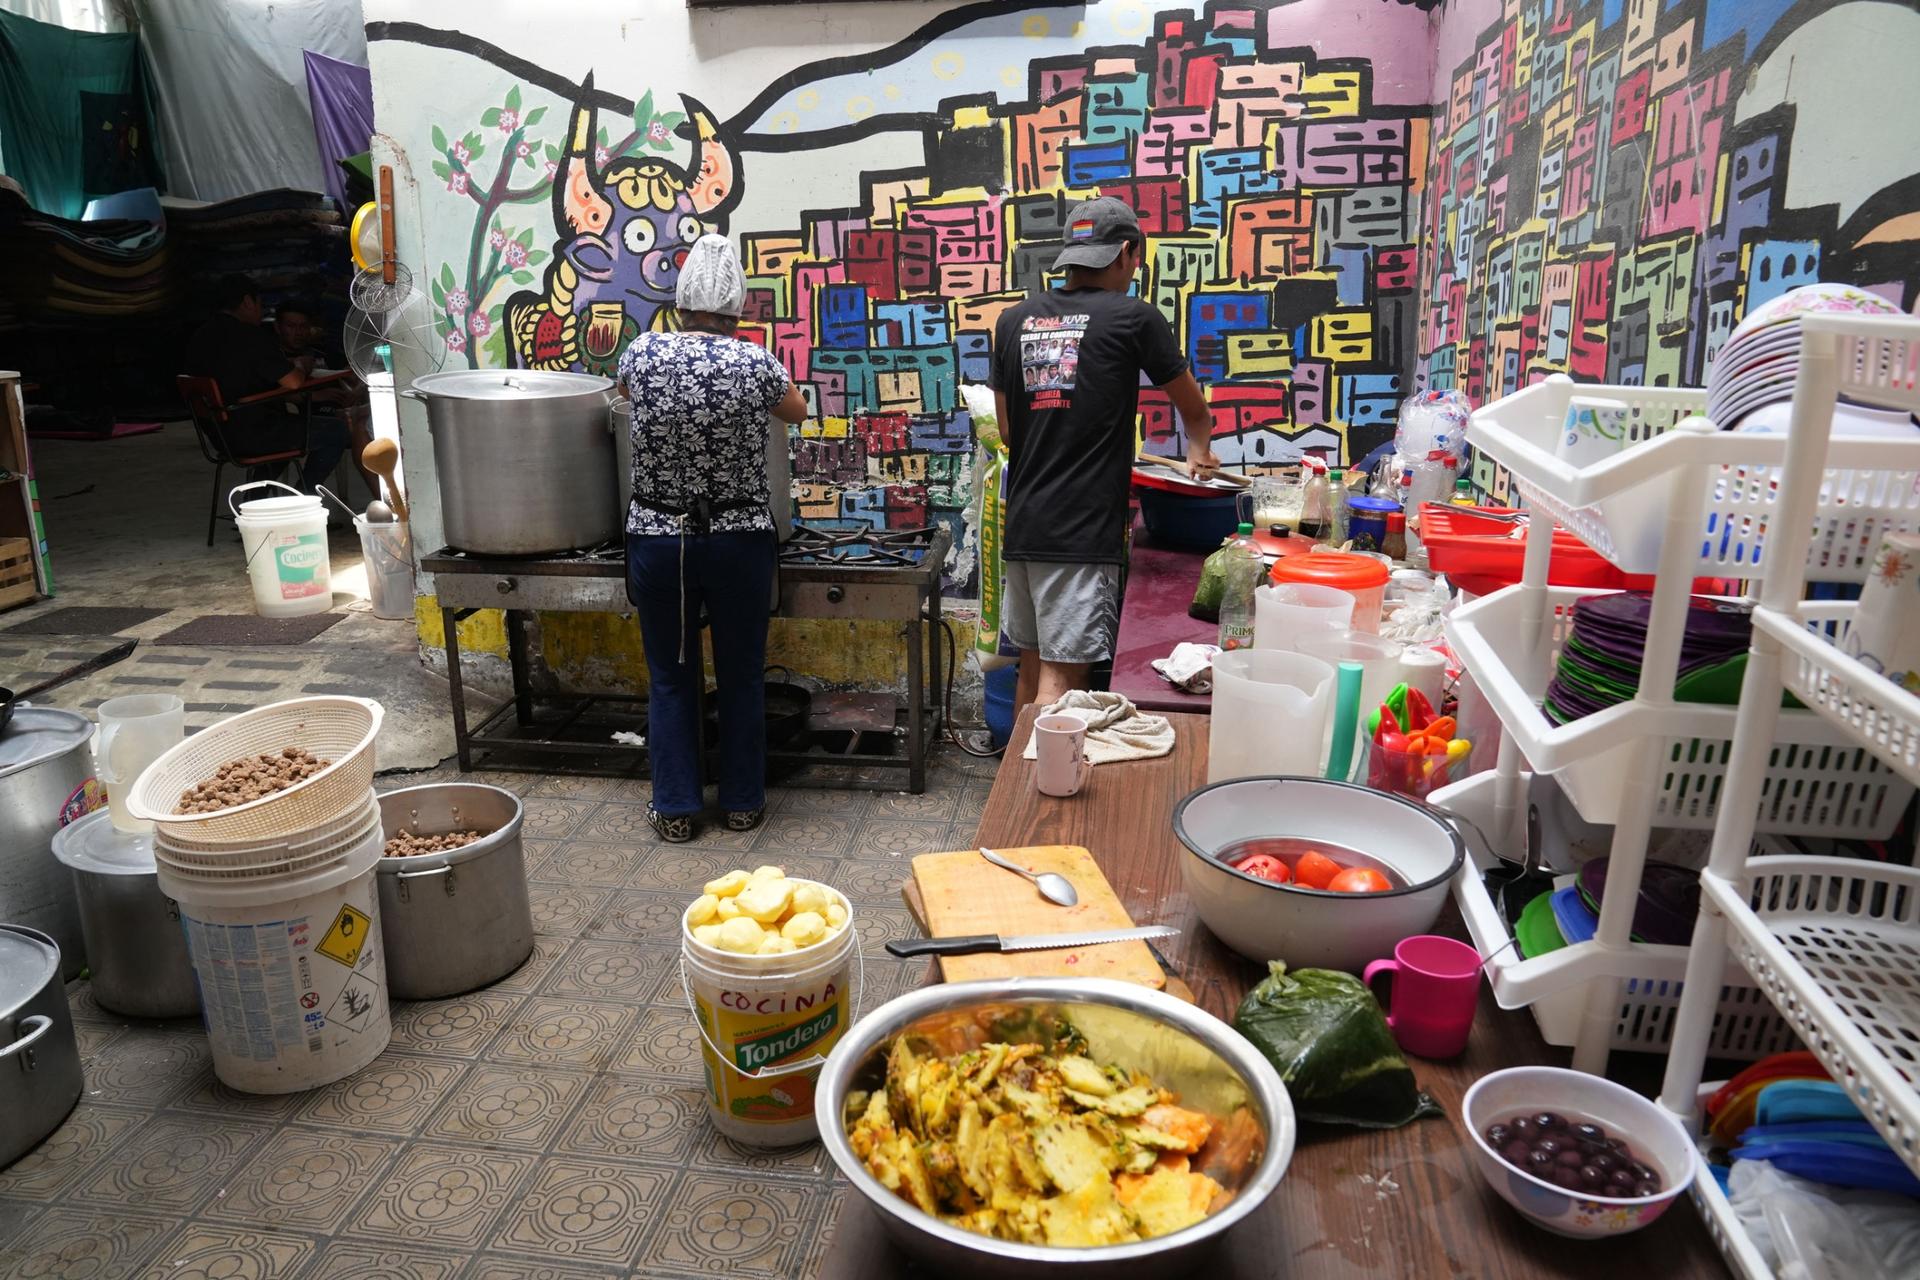 At Nuevo Peru's headquarters in Lima, volunteers cook meals for hundreds of protesters who have come from Peru's southern highlands.